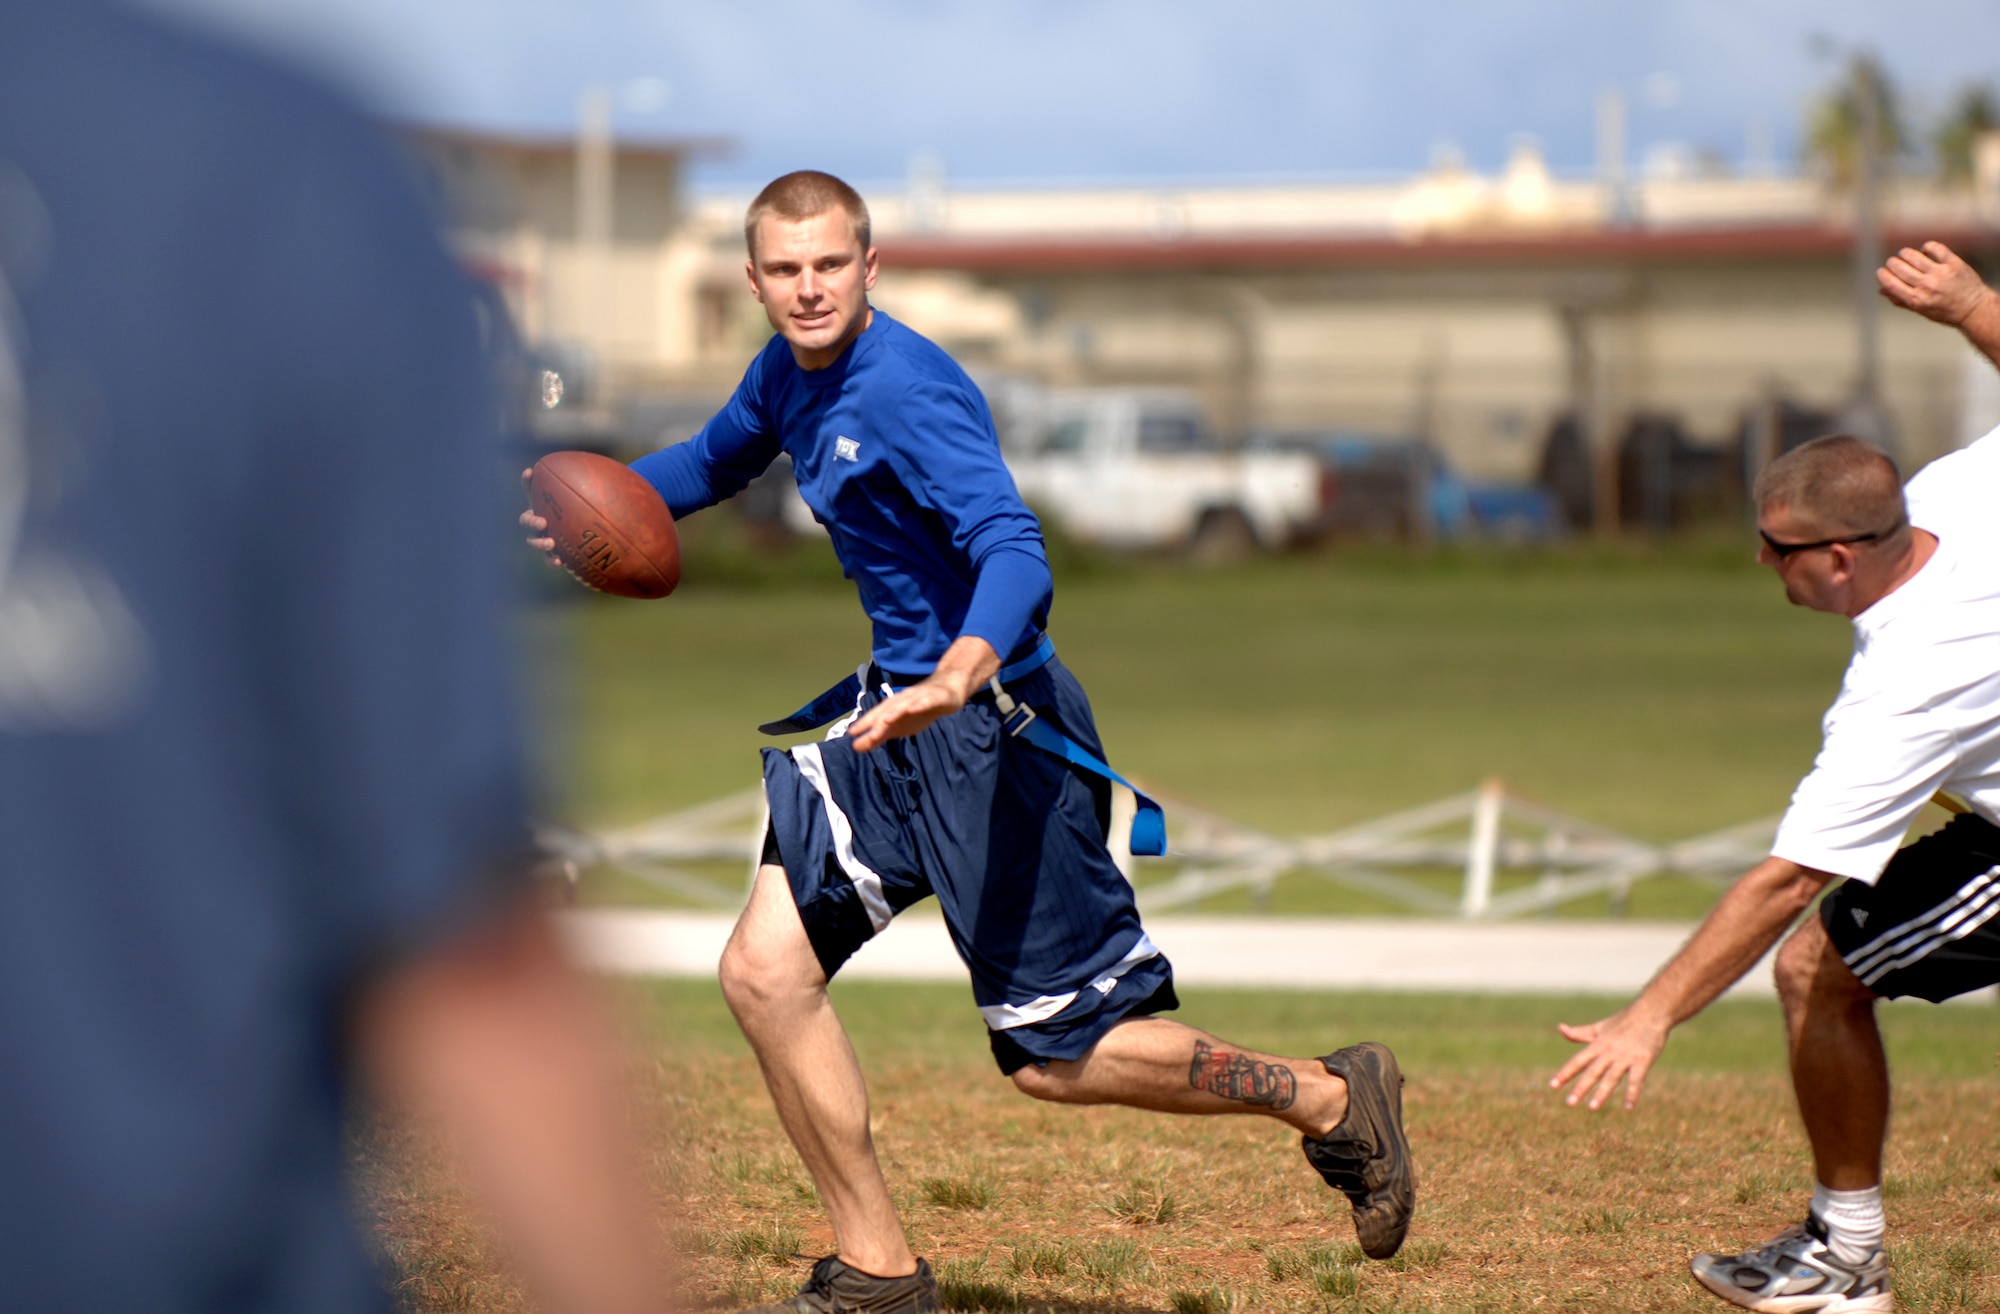 A member of the 36th Services Squadron evades a defender while looking down field to make a pass during a football match held during the Team Andersen Challenge, Dec. 14. (U.S. Air Force photo/Senior Airman Miranda Moorer)                  